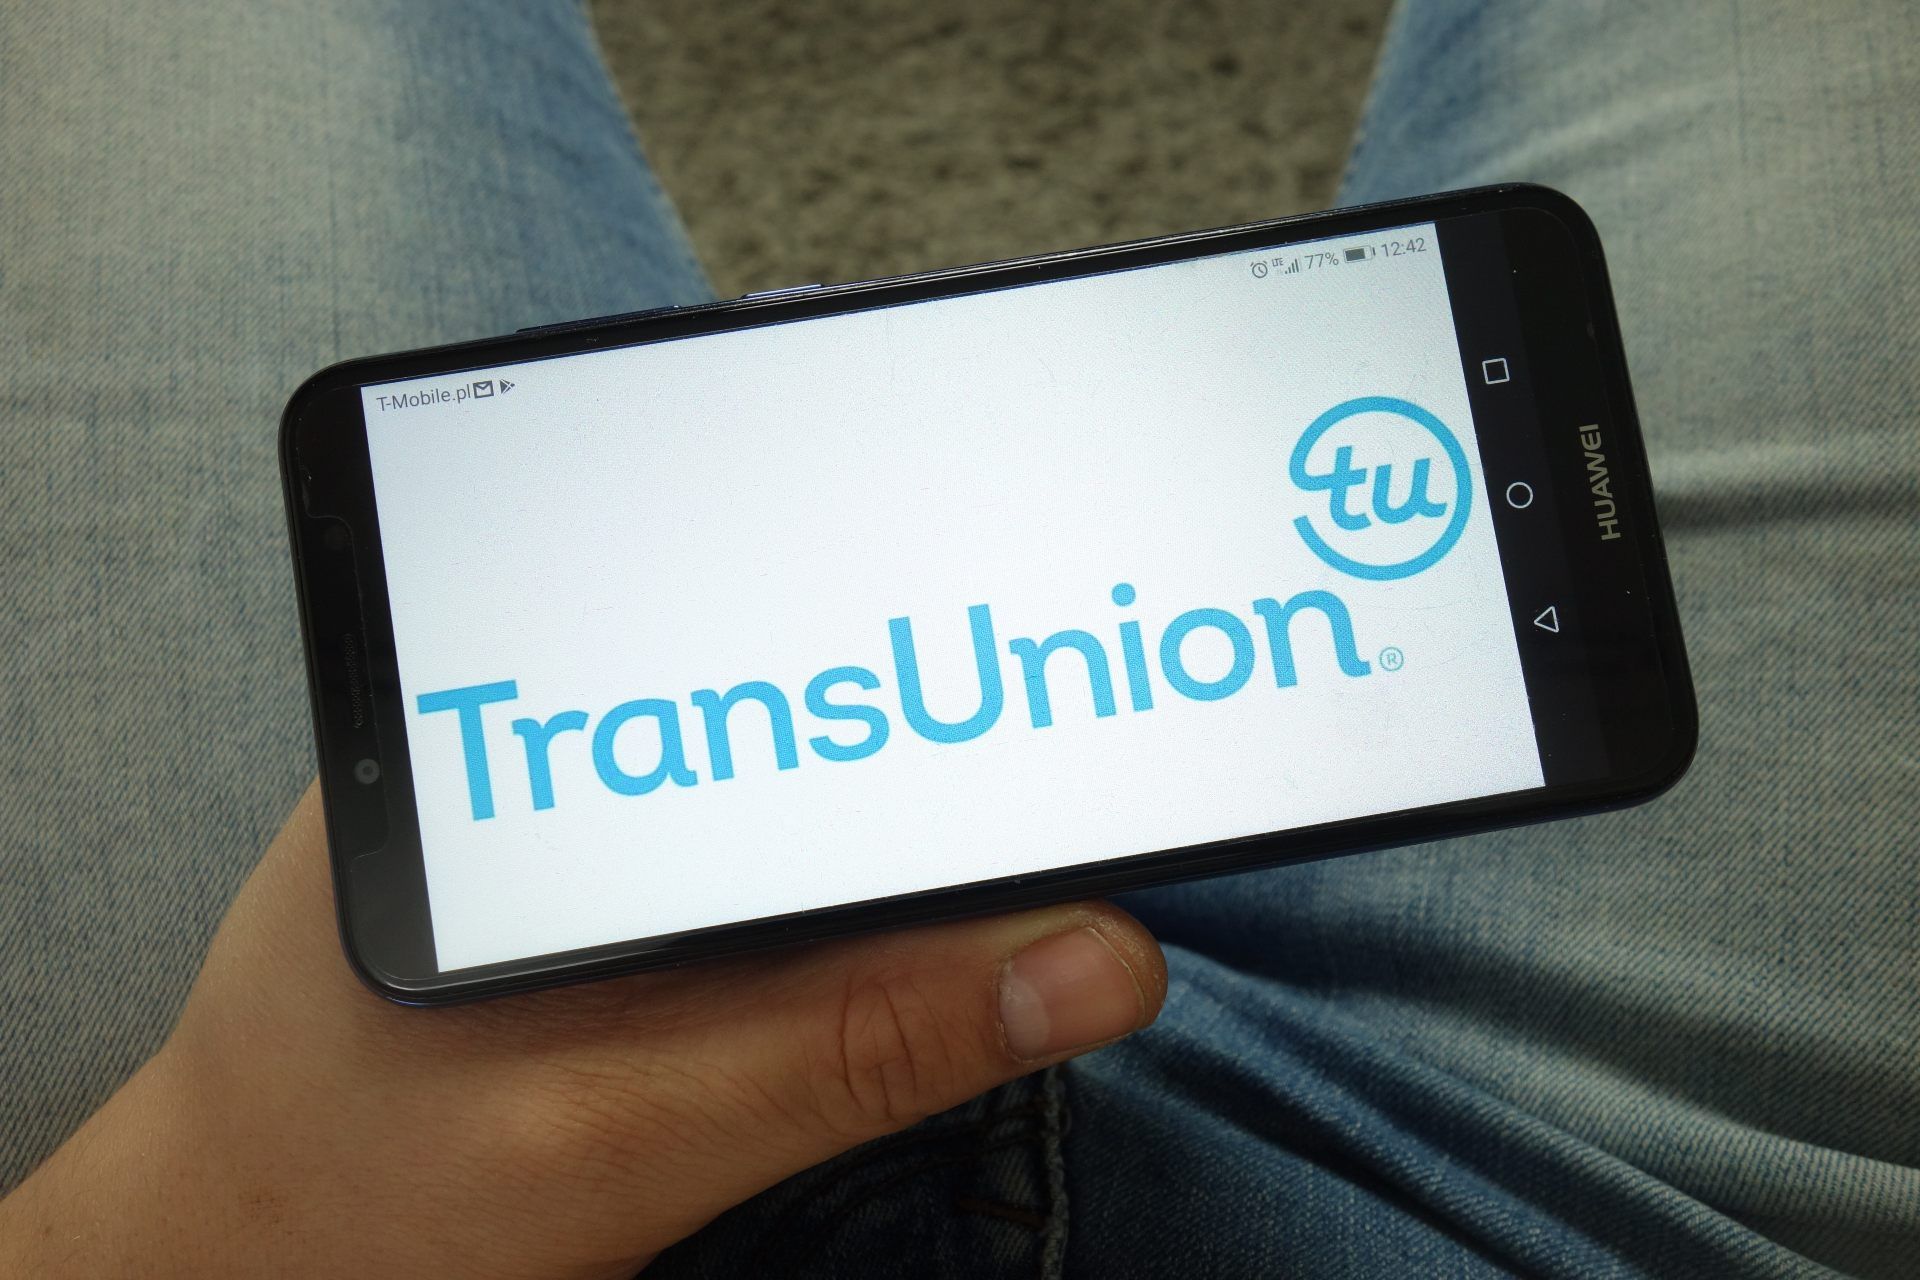 A person holds a smartphone showing the TransUnion logo